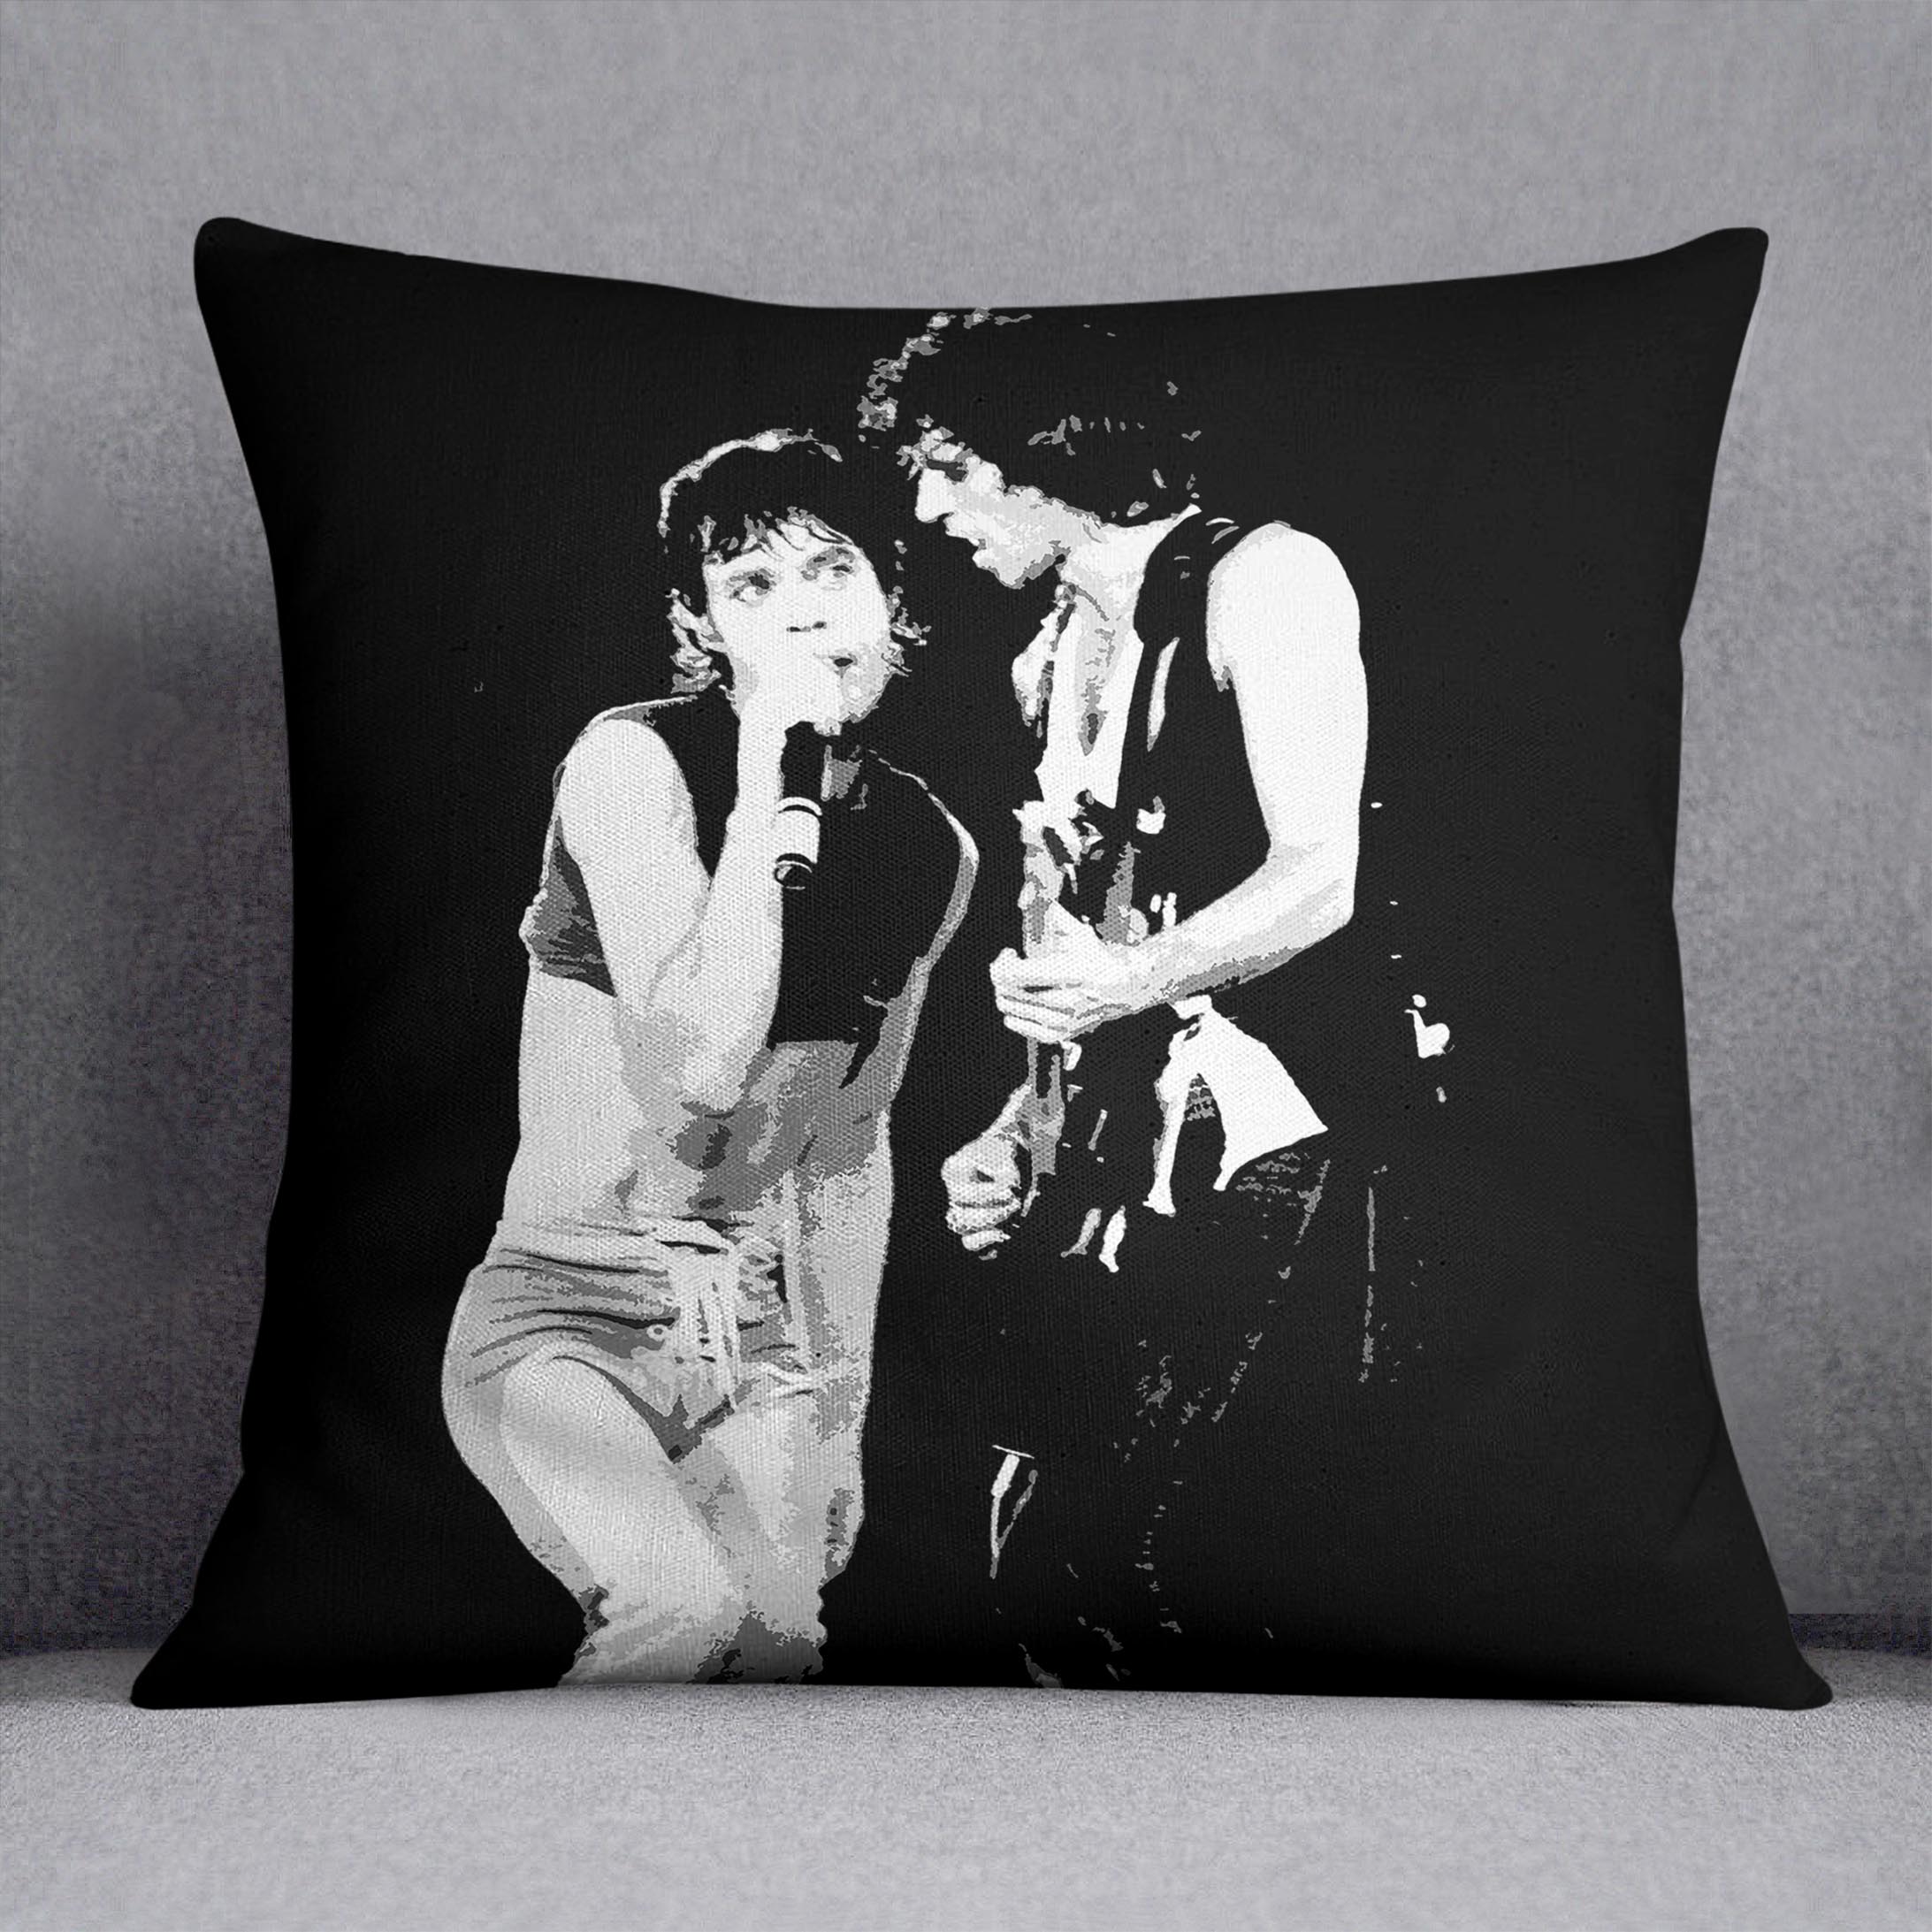 Keith Richards and Mick Jagger groove Cushion